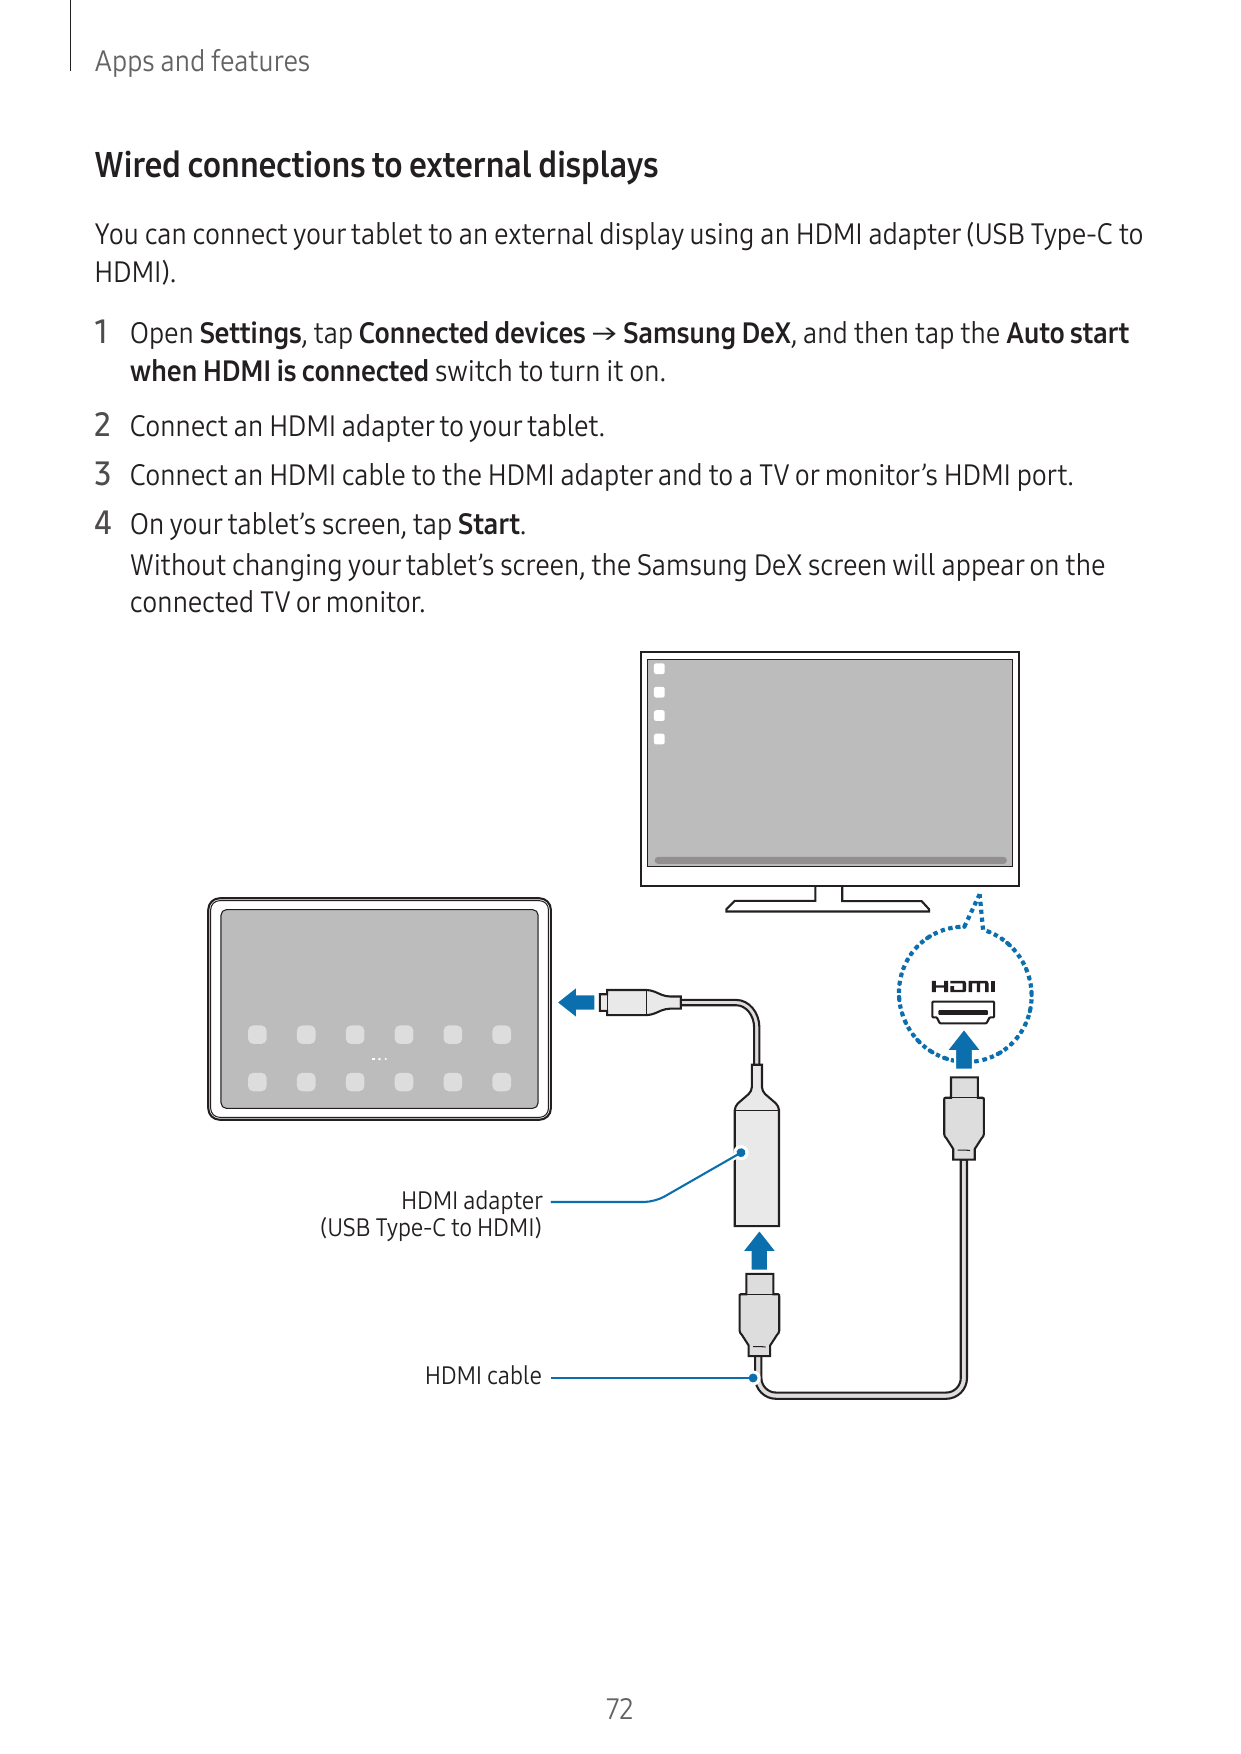 Apps and featuresWired connections to external displaysYou can connect your tablet to an external display using an HDMI adapter 